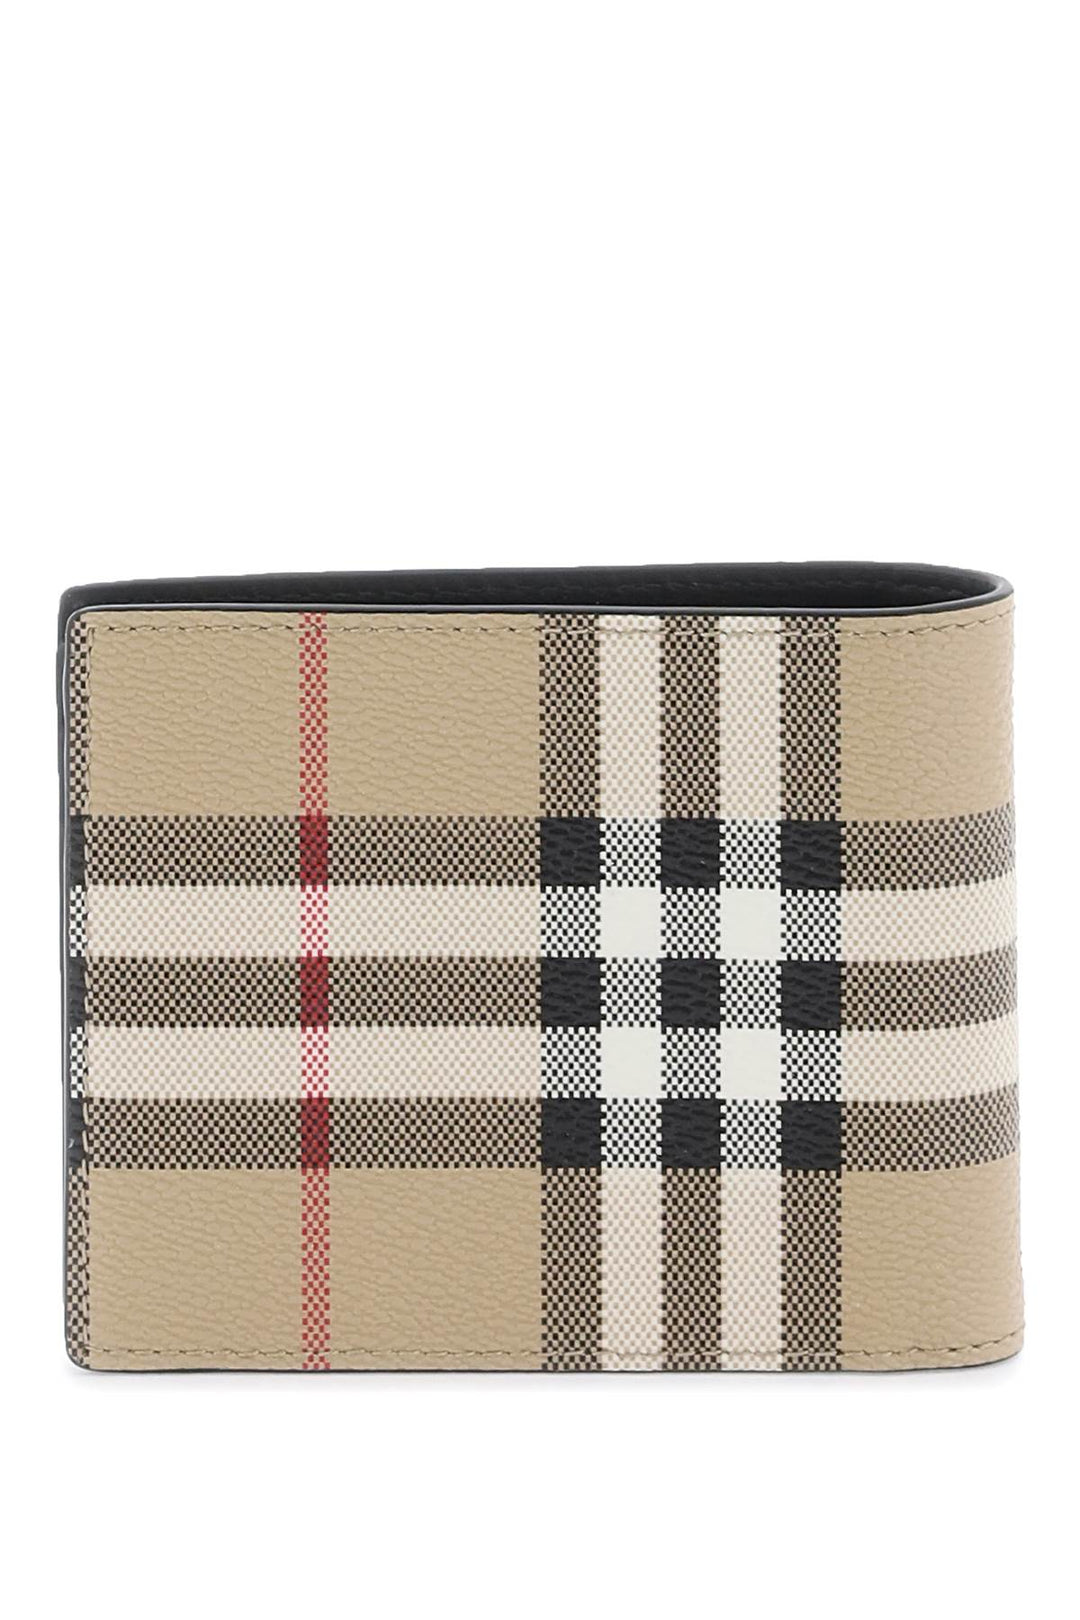 Burberry Bifold Wallet With Check Motiv   Beige